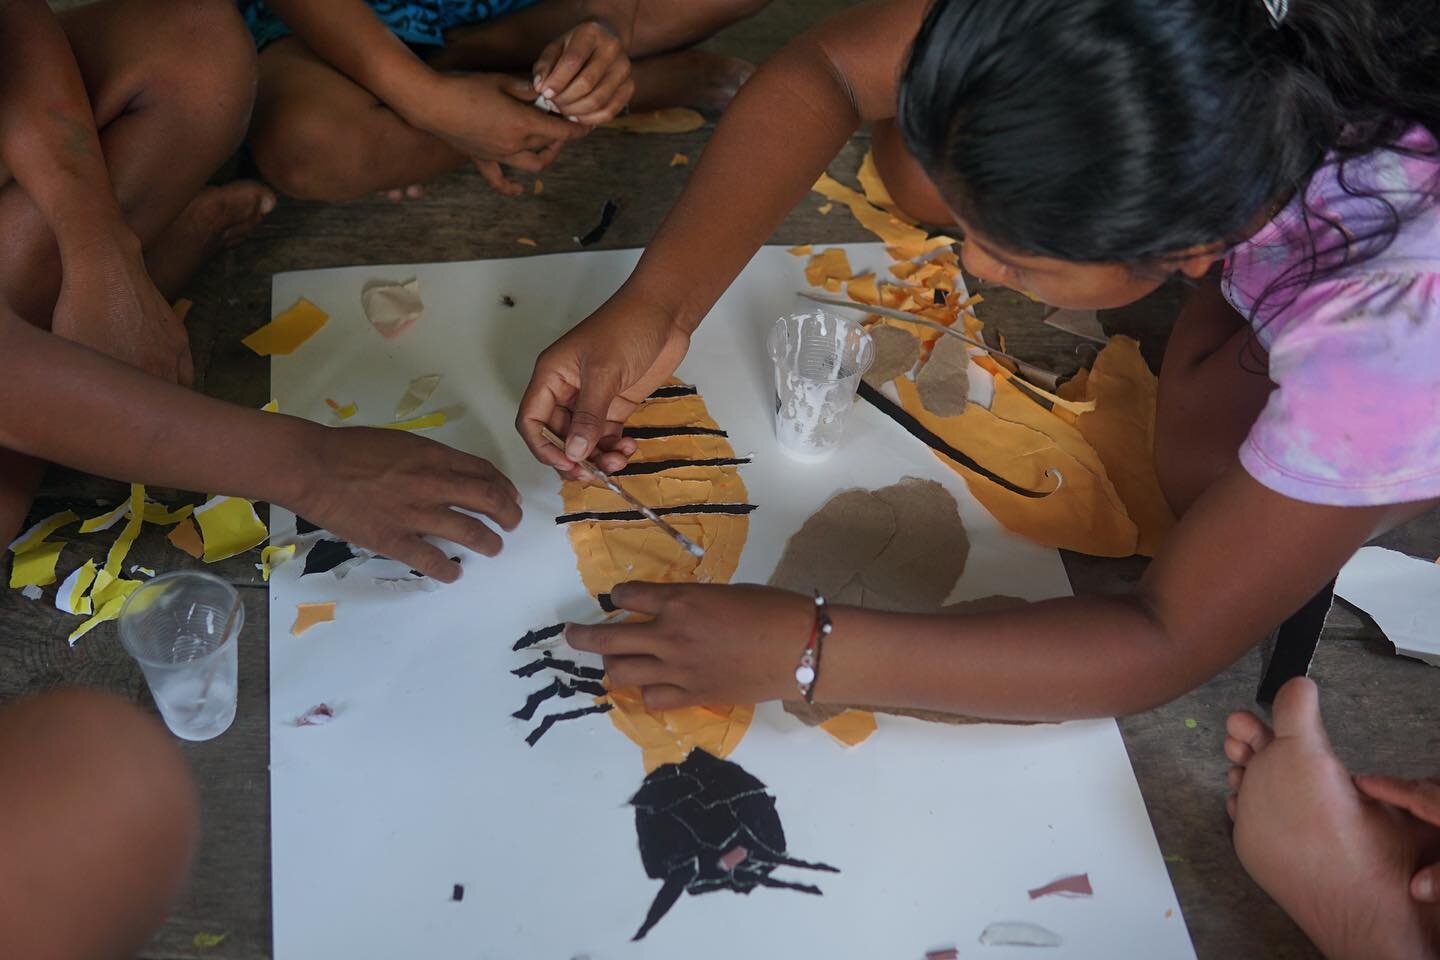 Maijuna beekeeping educators have recently been focused on teaching bee ecology and the Maijuna language to youth in their communities. 
&nbsp;
In addition to helping kids understand the connection between stingless bees and Maijuna culture, our educ